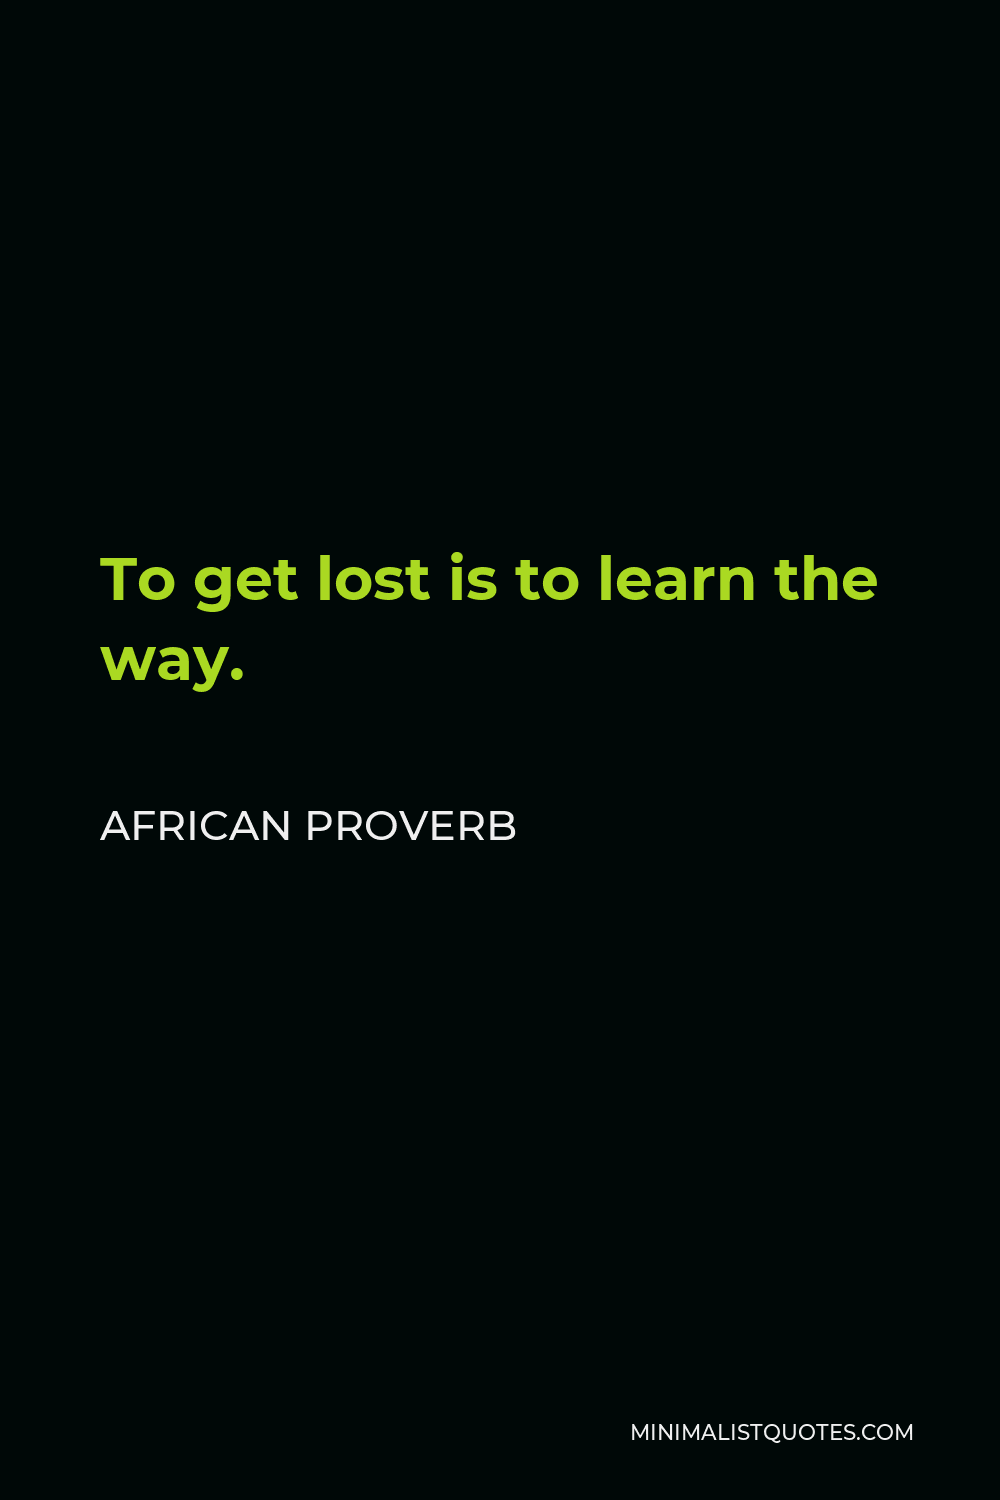 African Proverb Quote - To get lost is to learn the way.